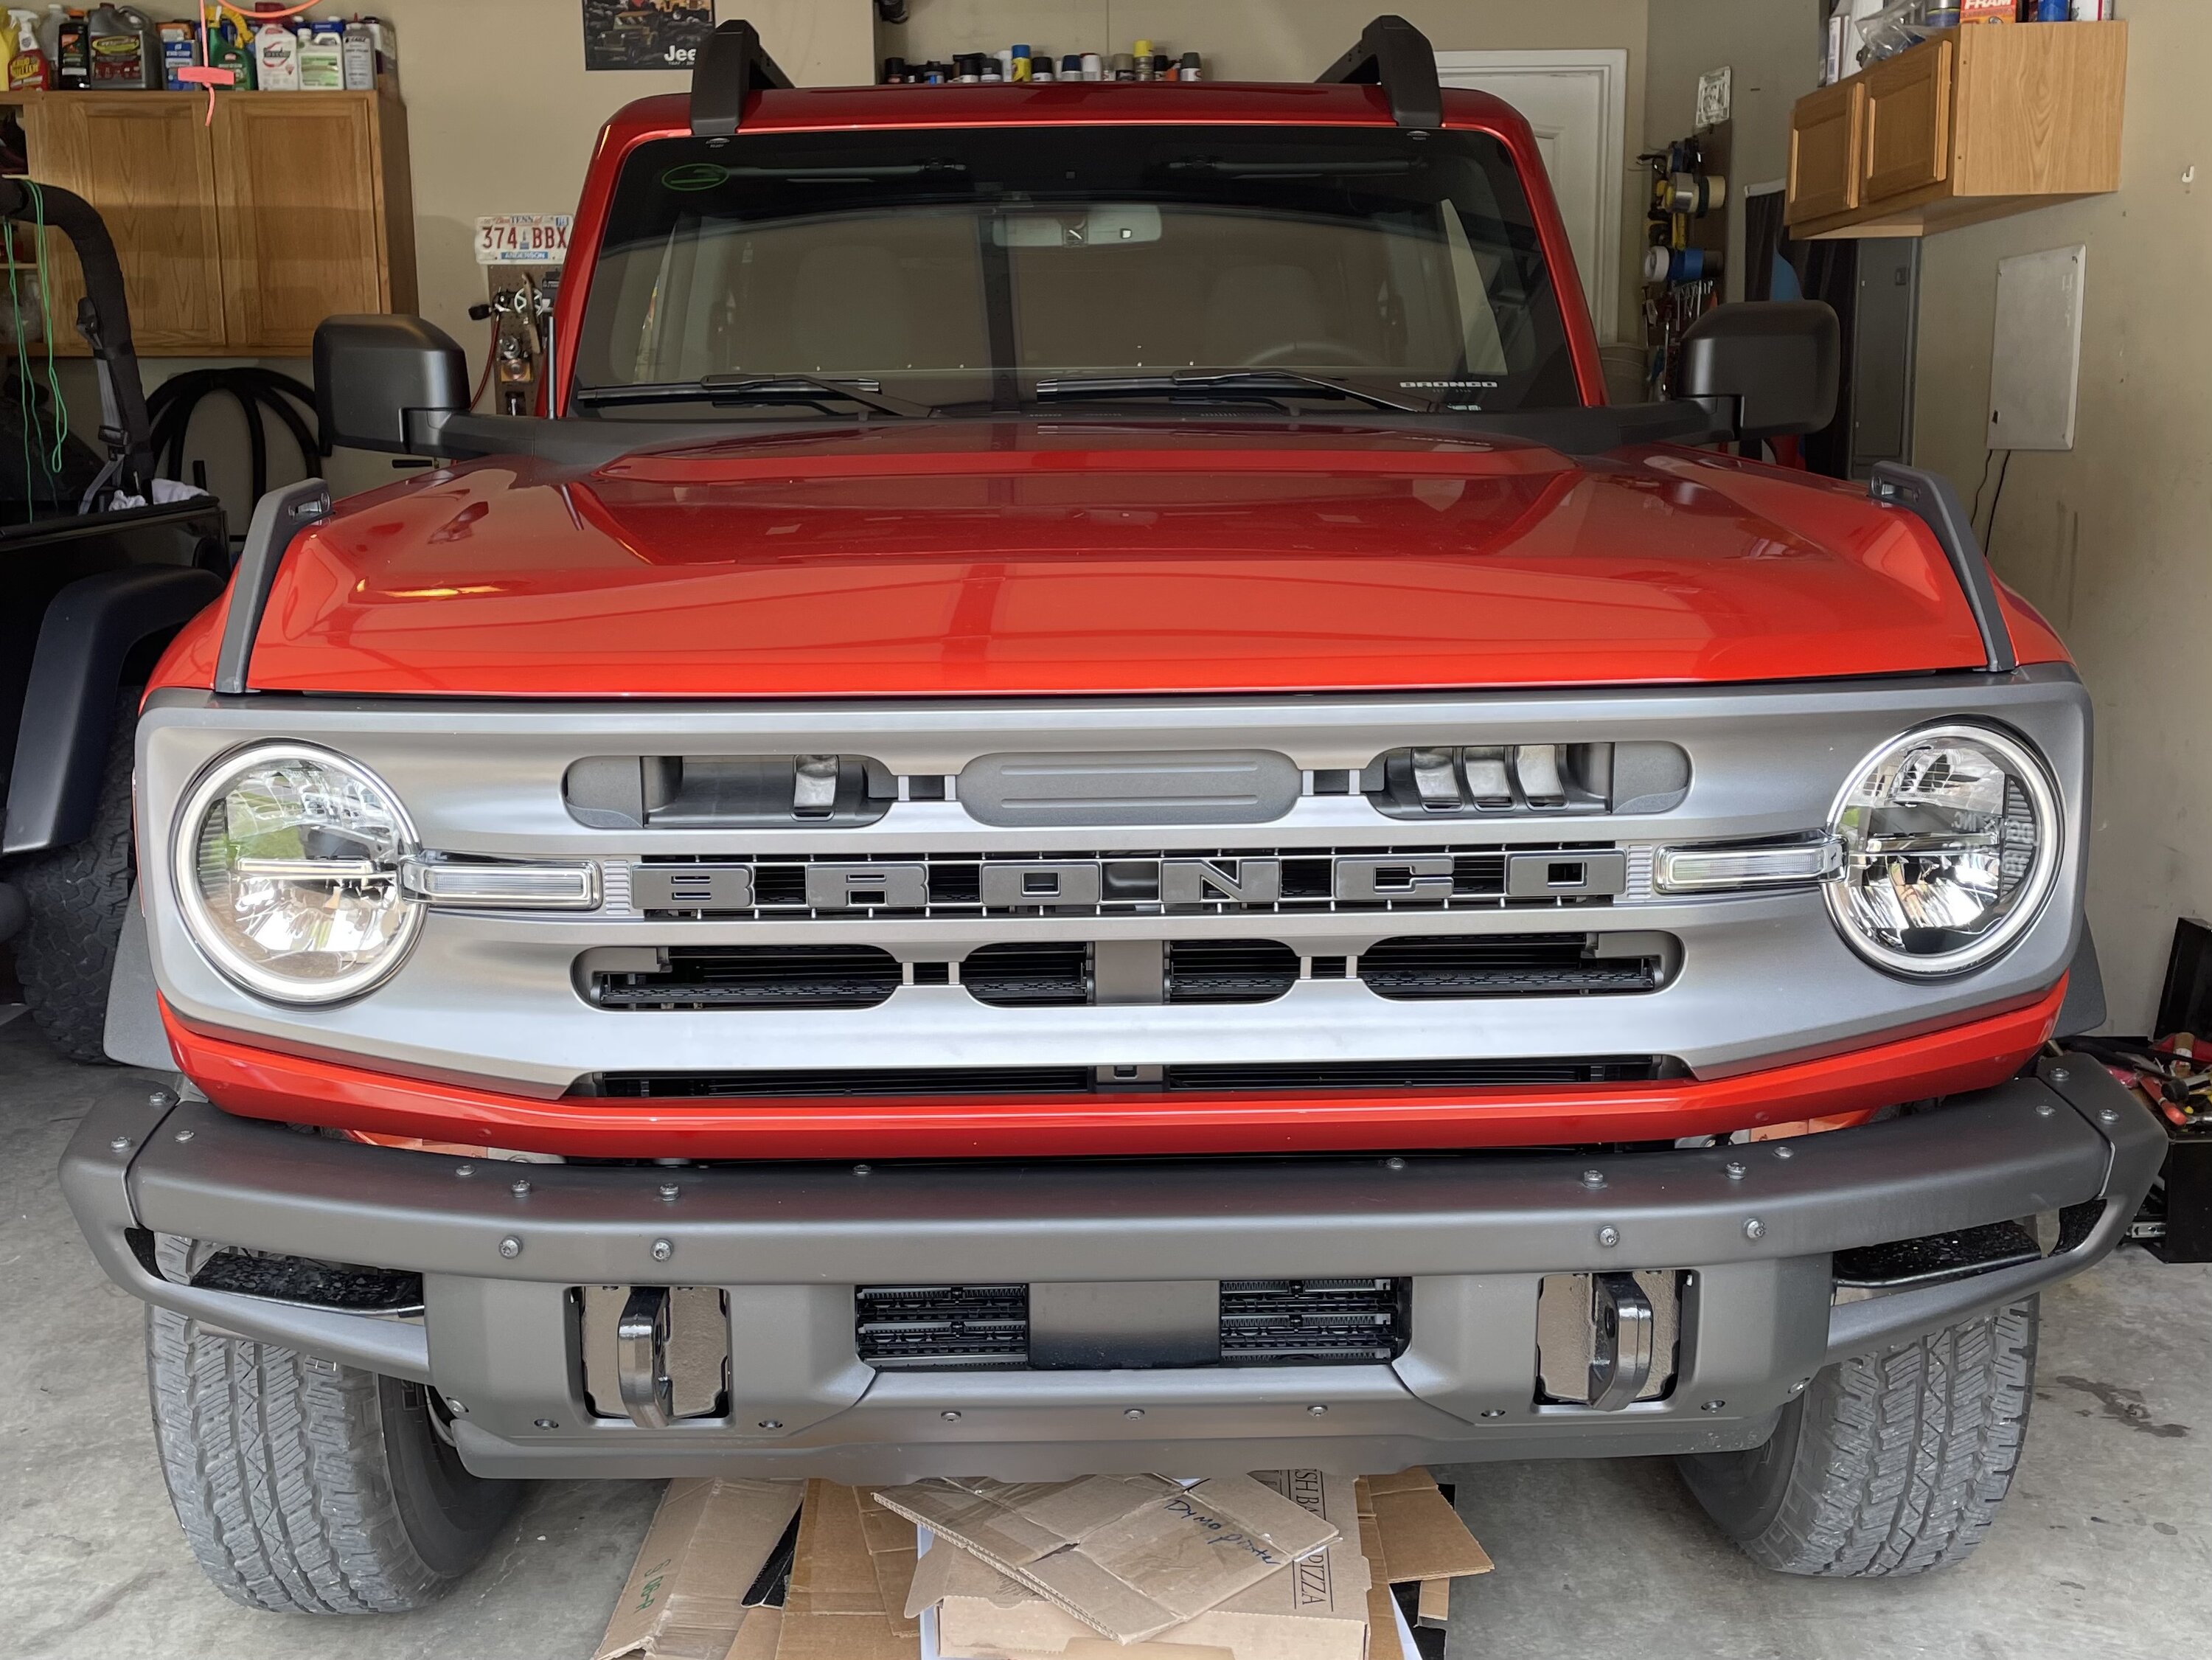 Ford Bronco Mesh grill inserts installed on Big Bend IMG_3856